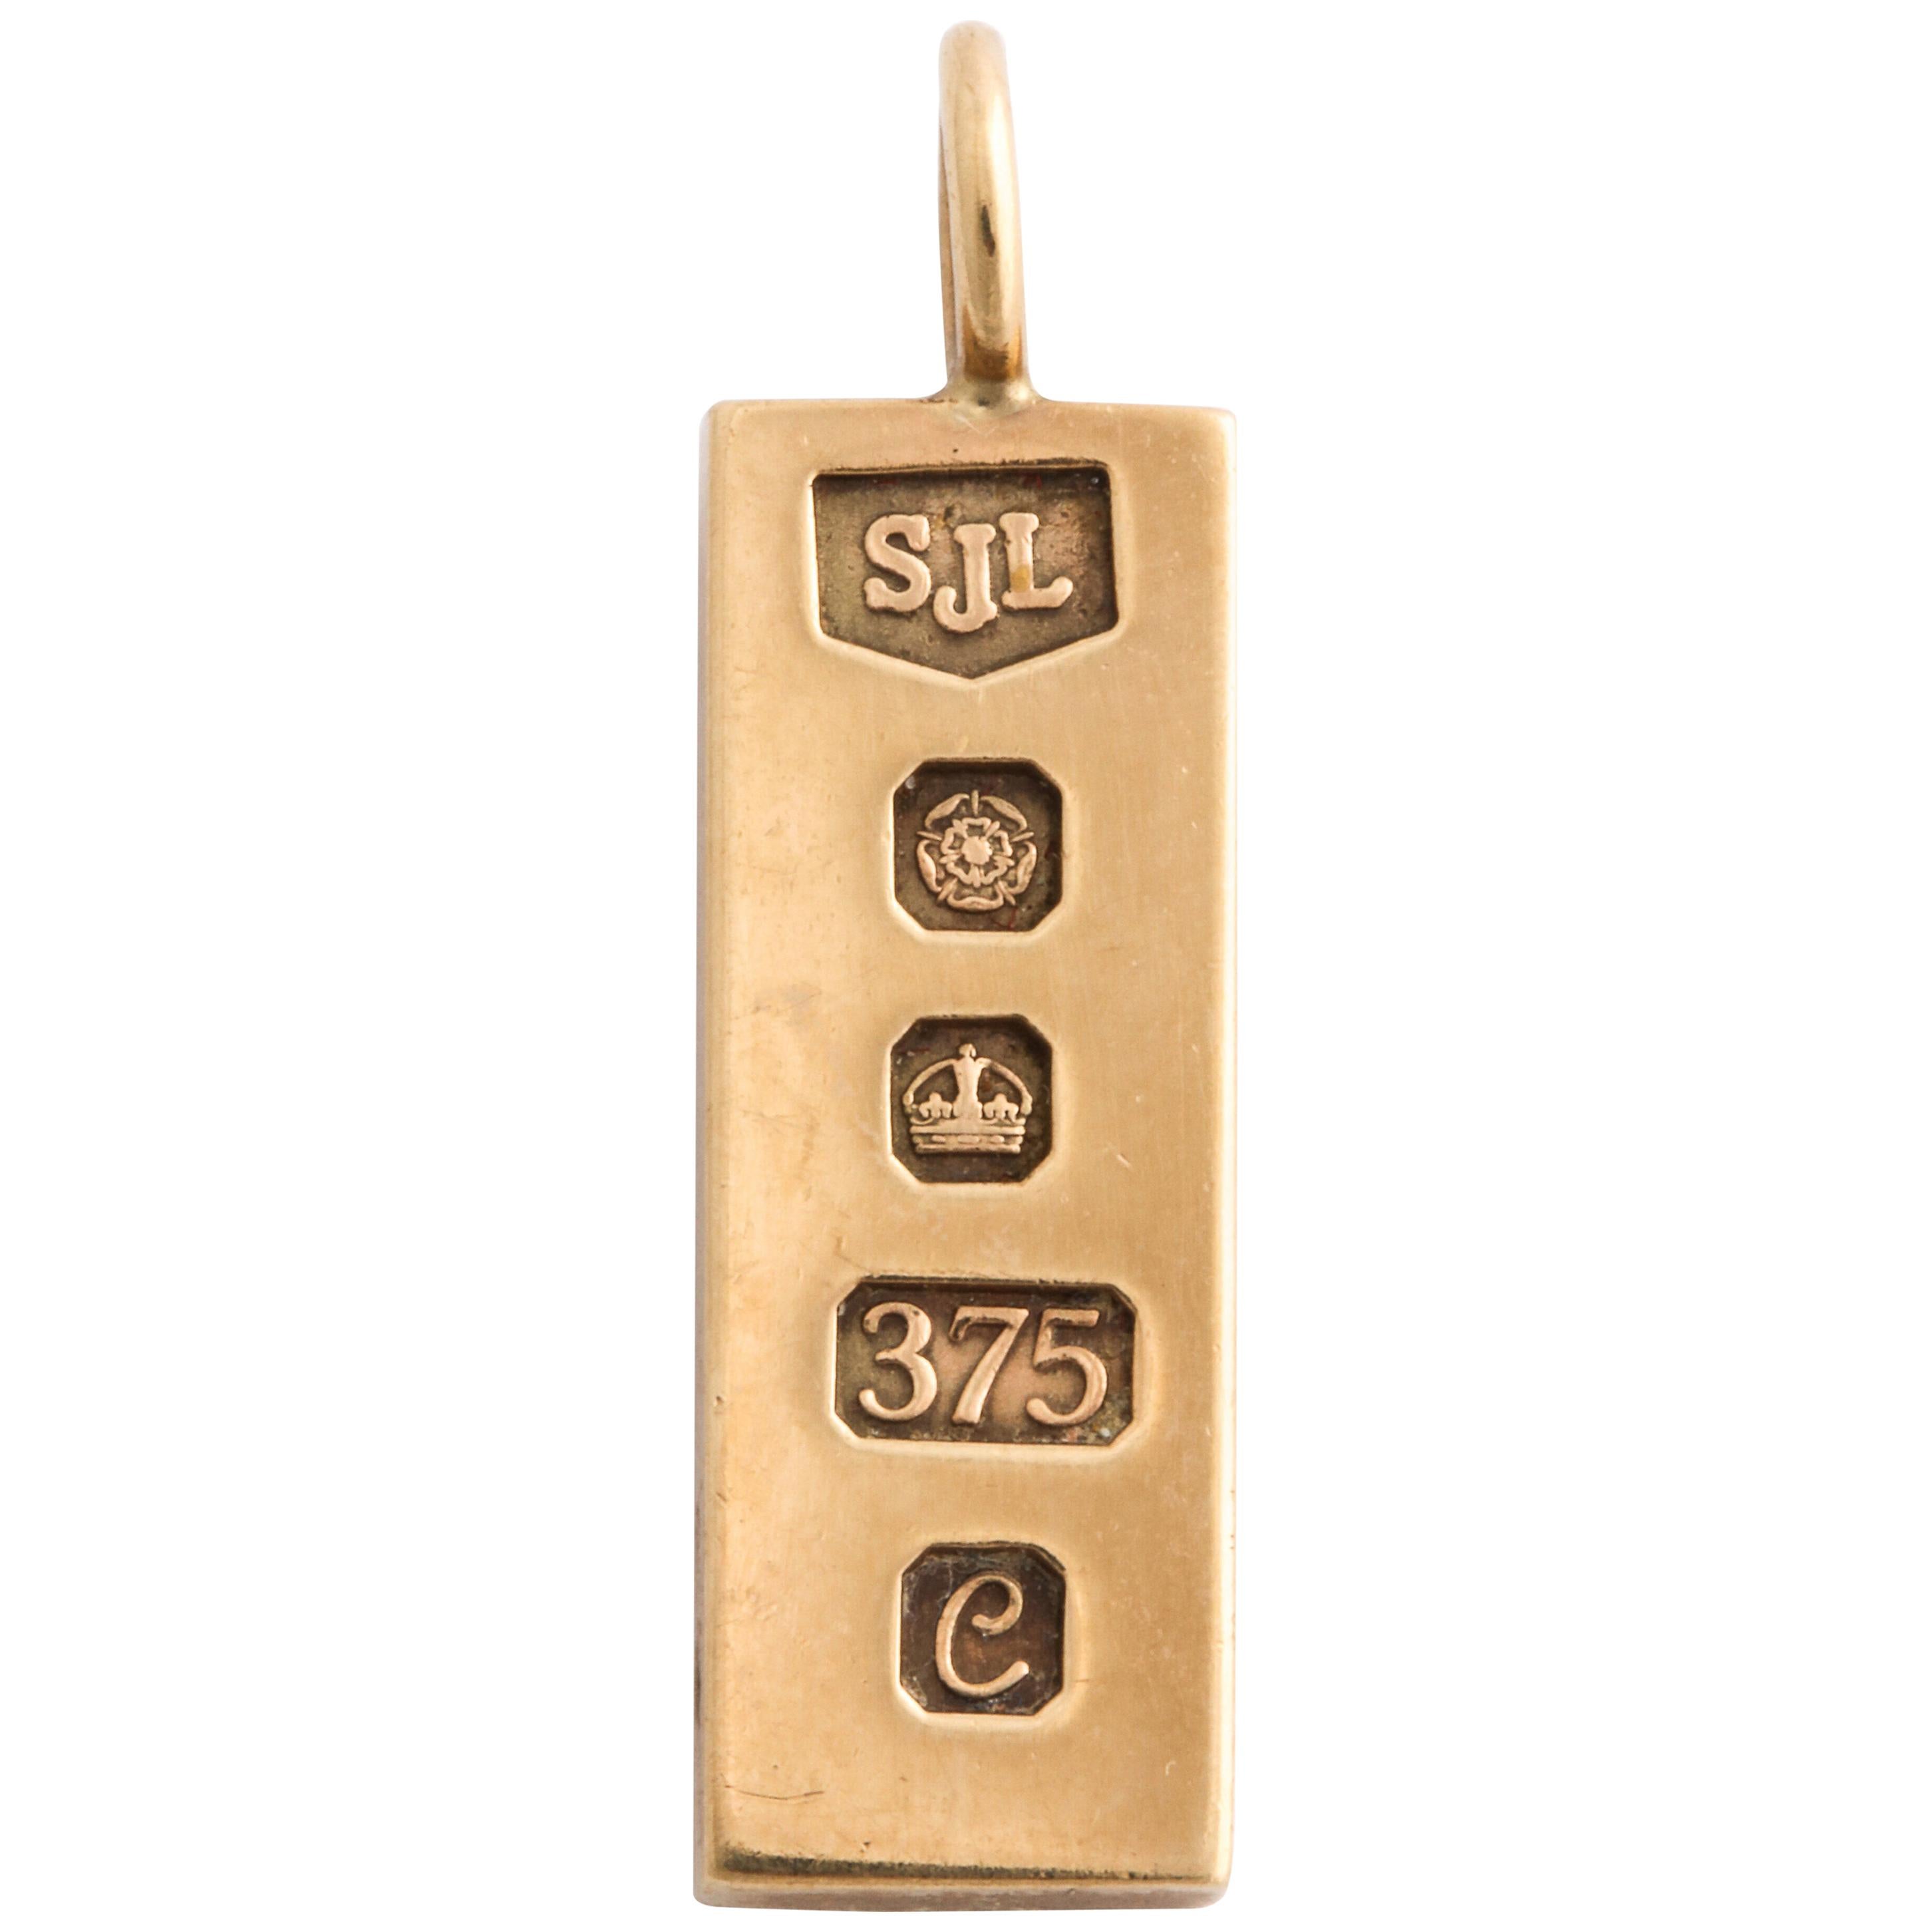 Of polished 9k gold, the ingot stamped with English hallmarks, a rose for the town of Sheffield, the date letter e for 1977, 375 for 9k, a crown and maker’s mark SJL, with circular suspension ring.

1 ¼ in. (3.2 cm) long including ring; 3/8 in. (